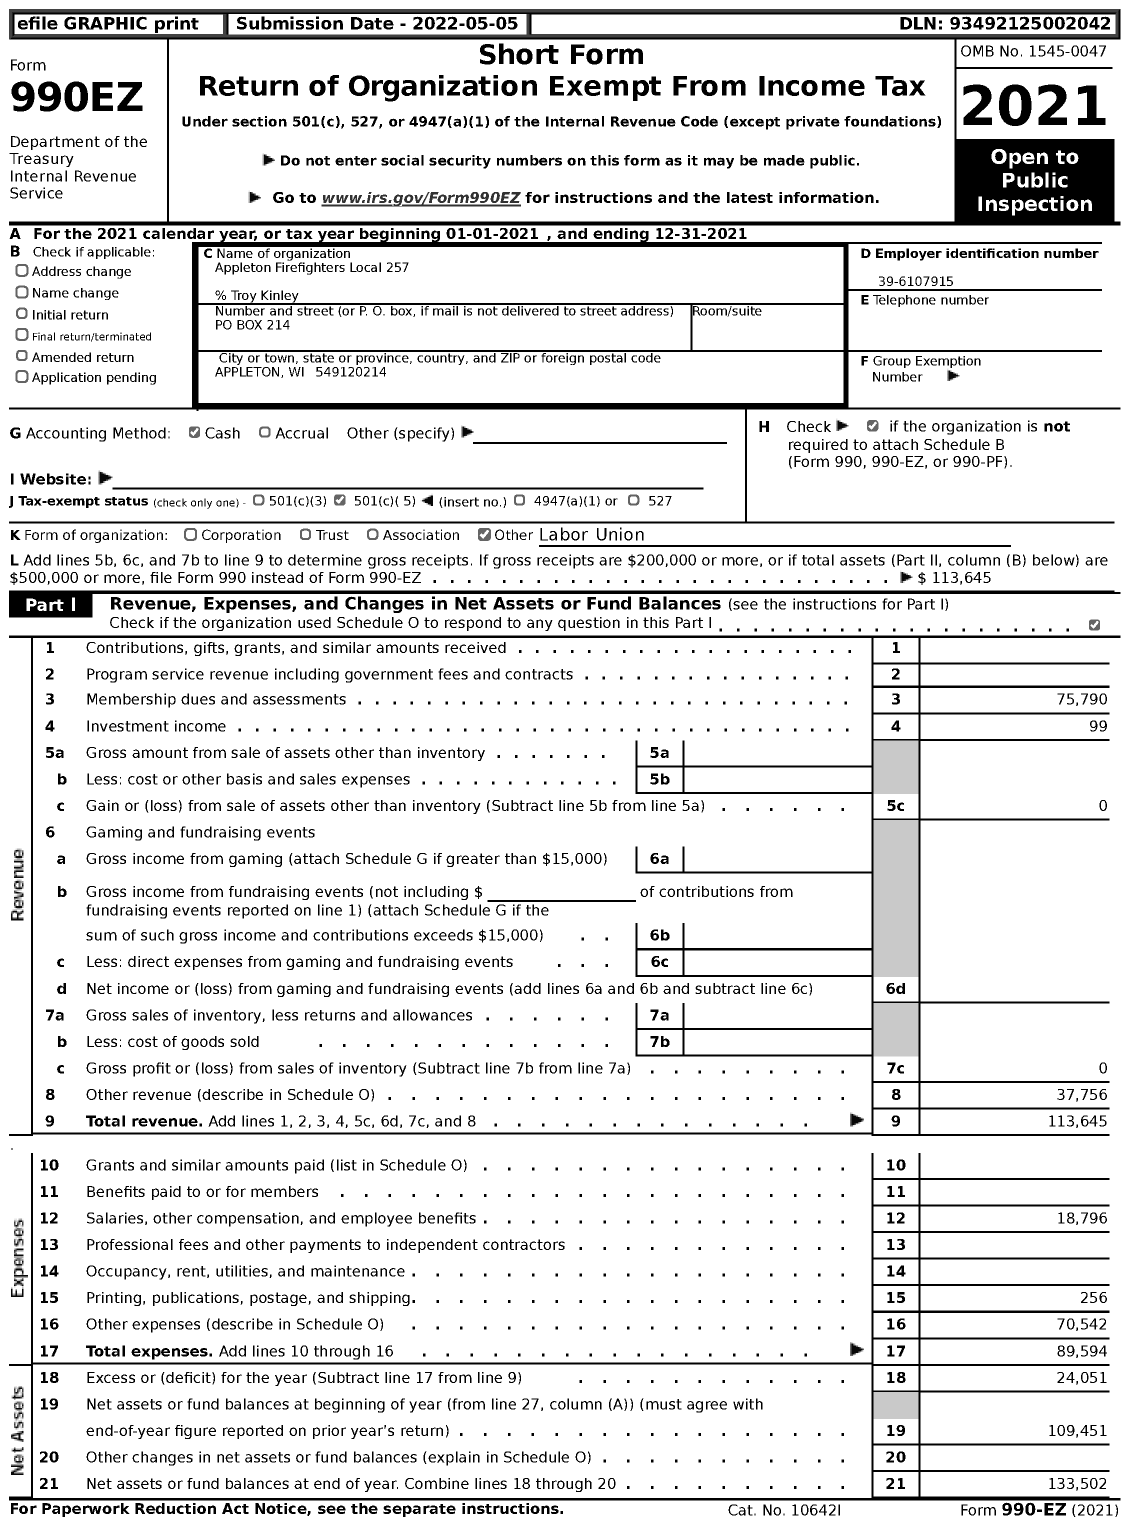 Image of first page of 2021 Form 990EZ for International Association of Fire Fighters - L0257 Appleton